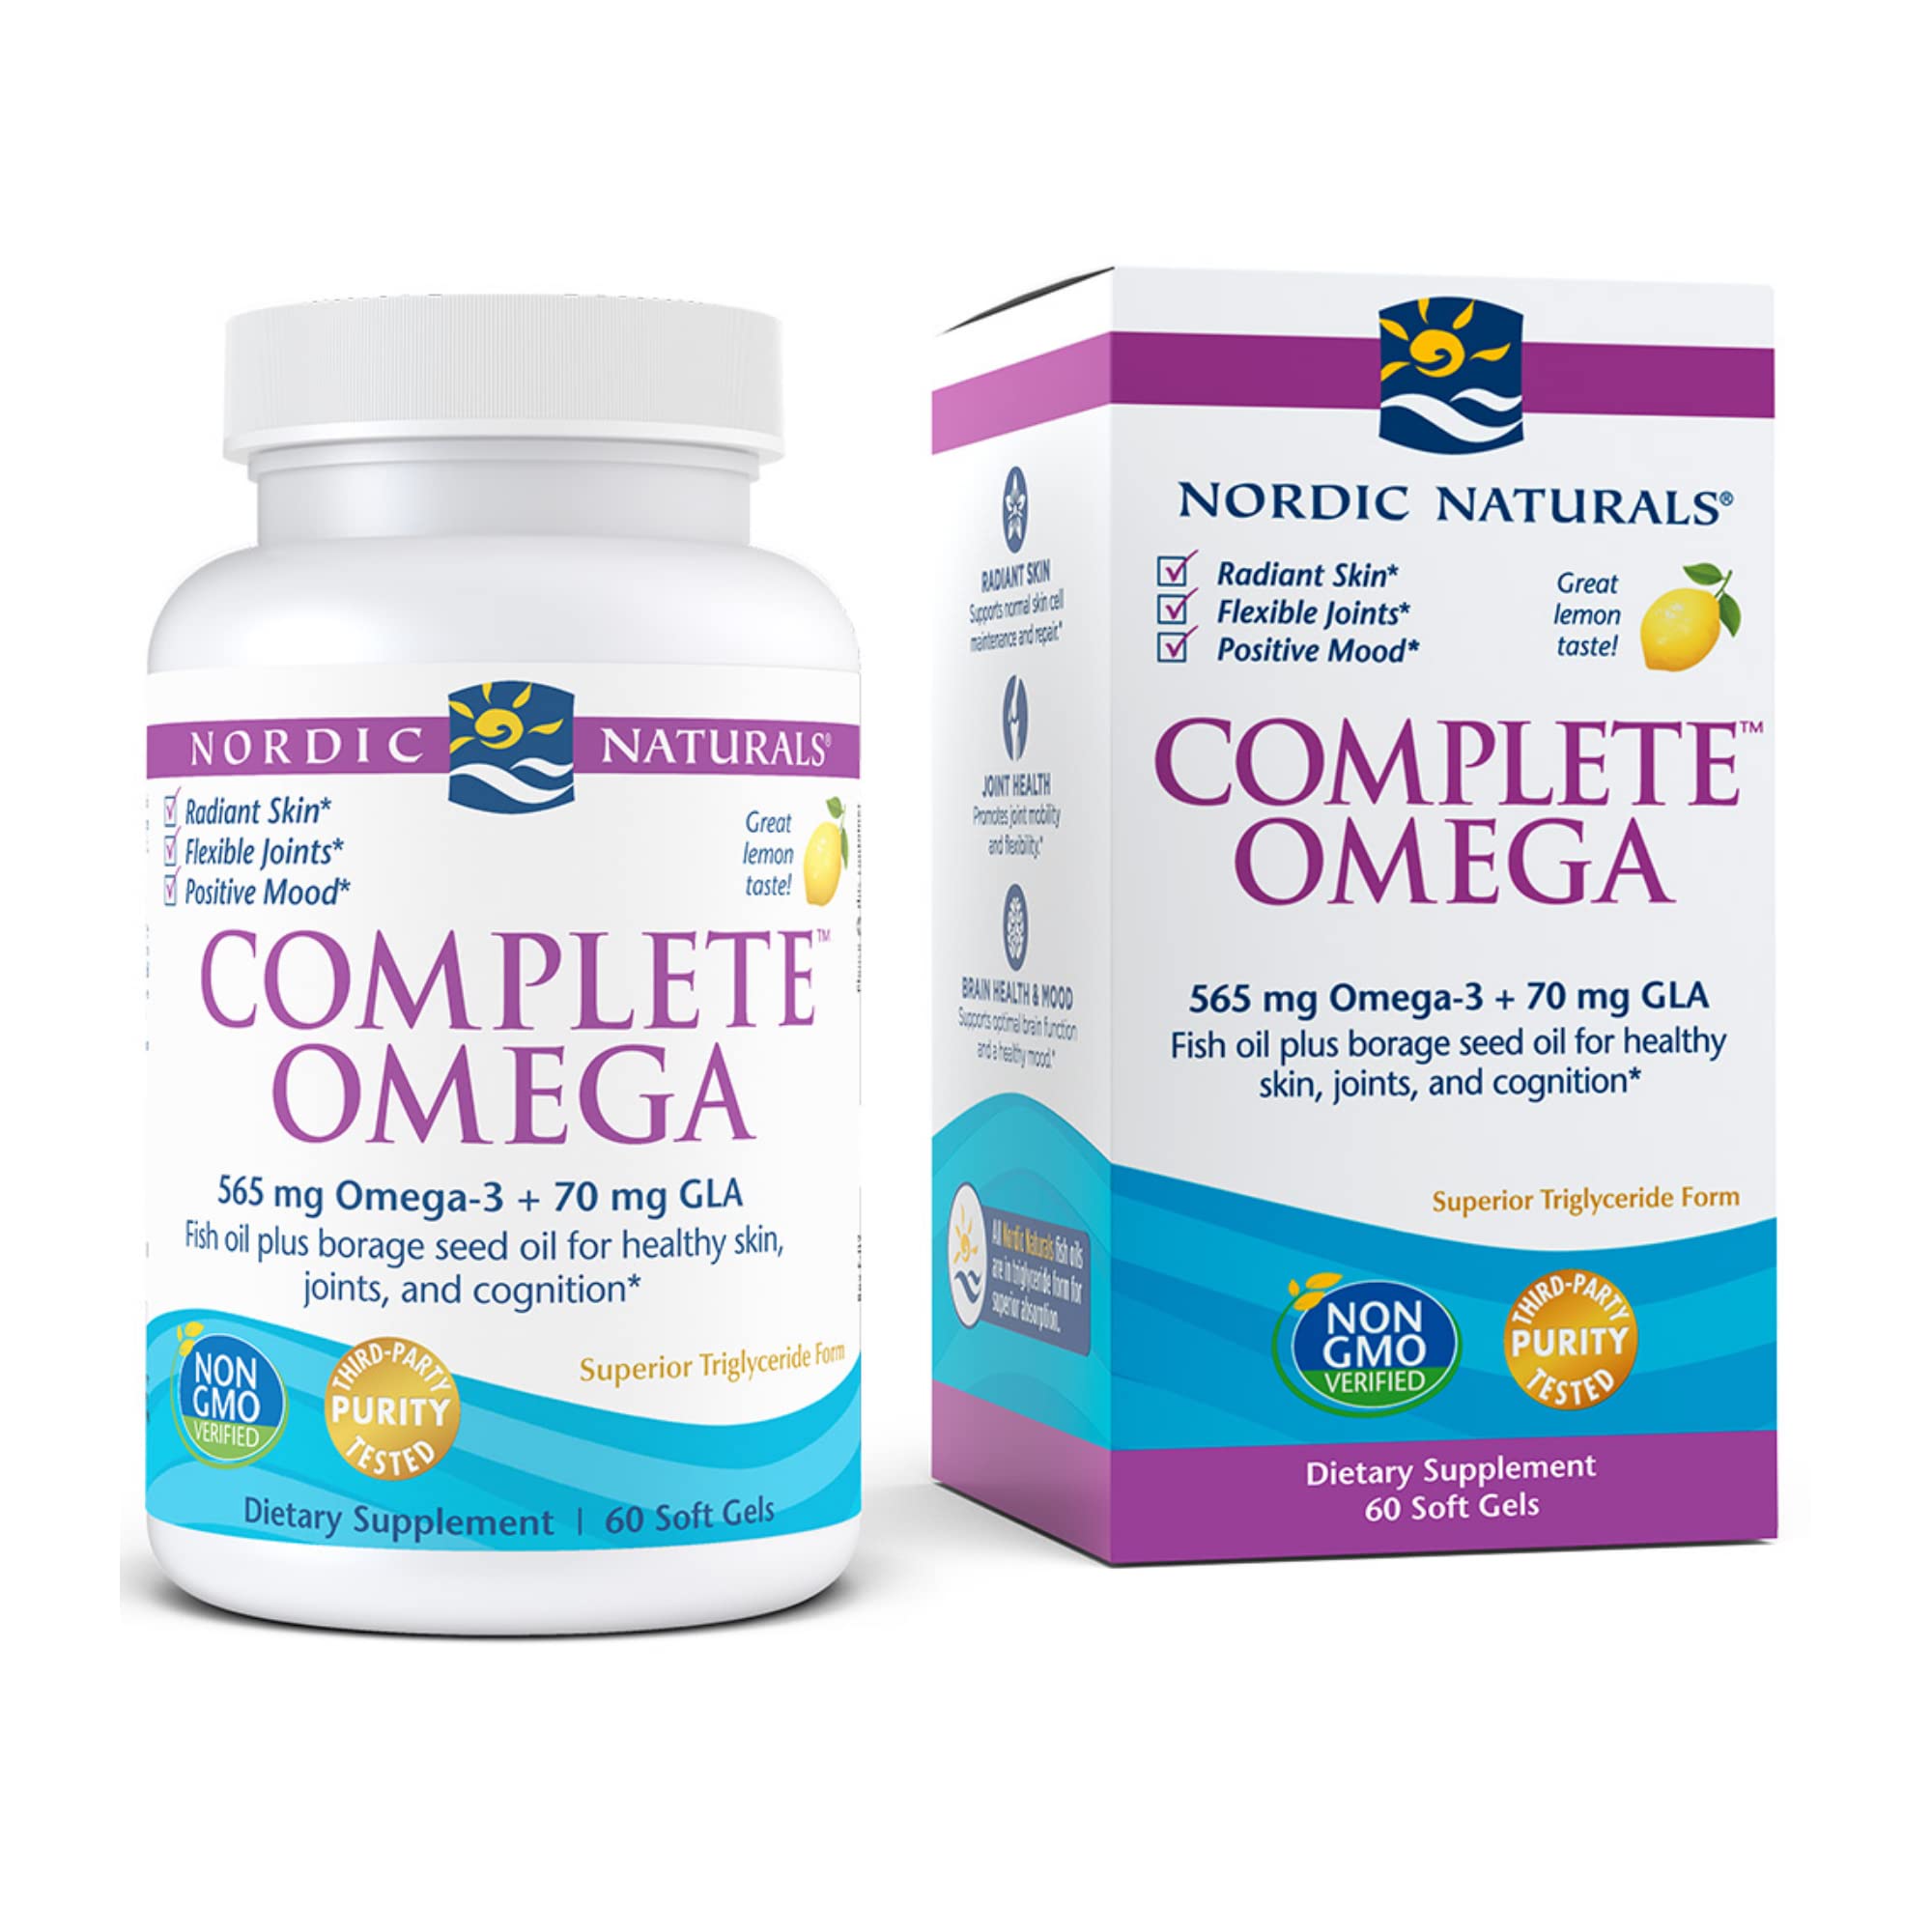 Nordic Naturals - Complete Omega, Supports Healthy Skin, Joints, and Cognition, 60 Soft Gels